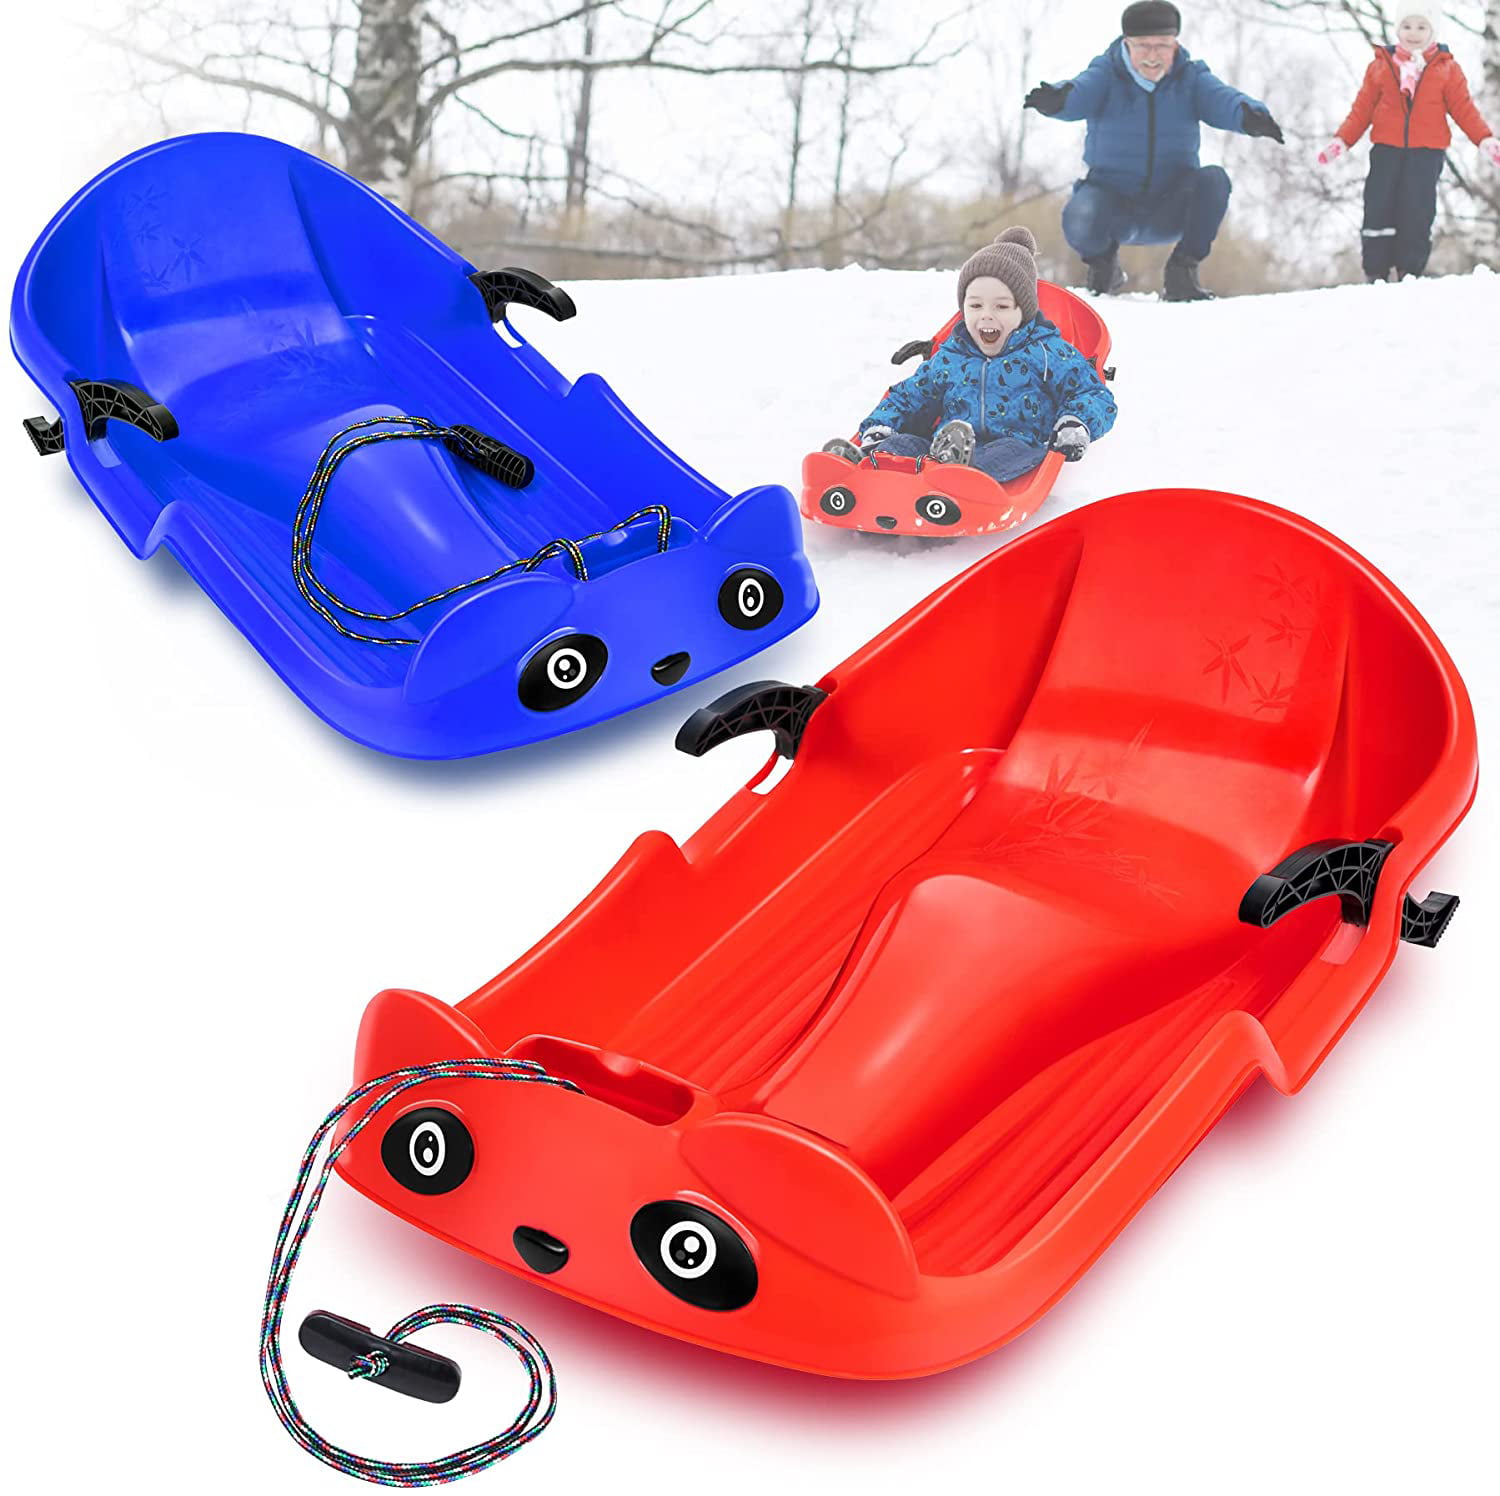 Sand Grass Snow Skiing Snowboard Sleigh Plastic Sledge with Pull Rope Family Fun Slider for Children Snow Sled Kids Toboggan Downhill Pull Sled